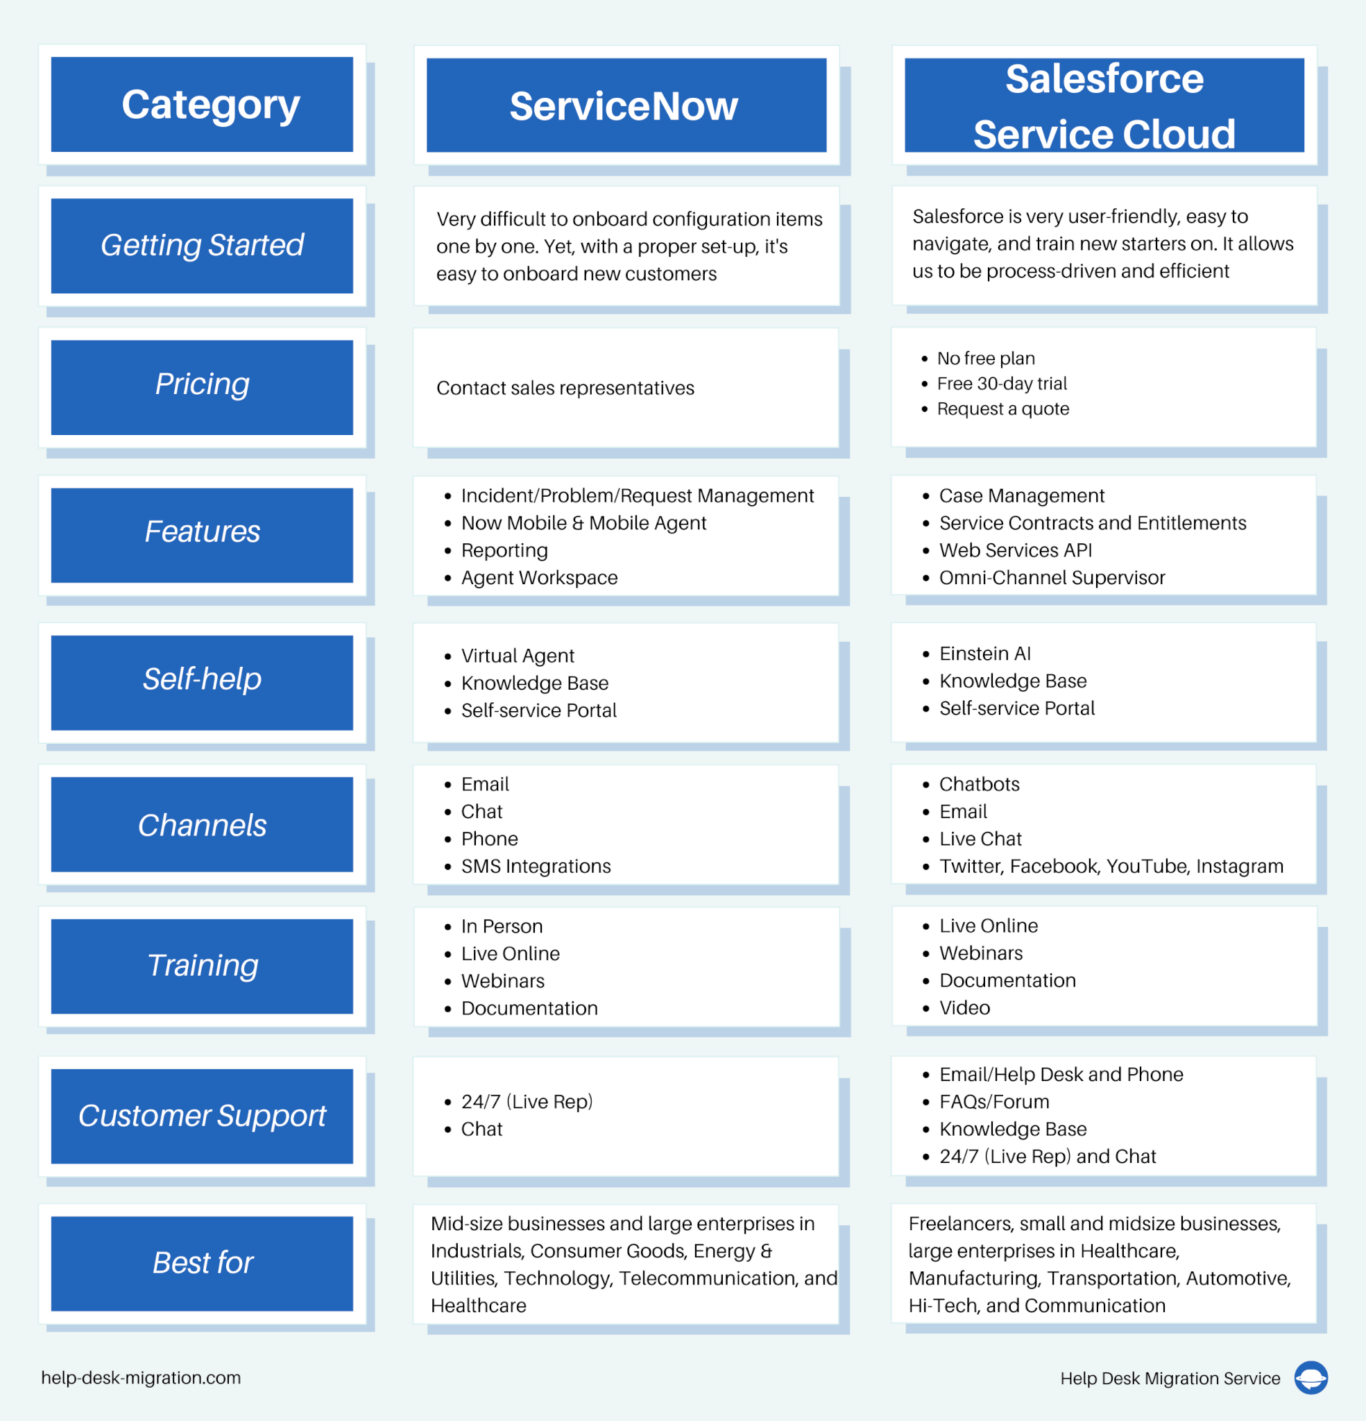 A table comparing ServiceNow to Salesforce Sales Cloud including categories such as: getting started, pricing, features, self-help, channels, training, customer support, best for use cases,